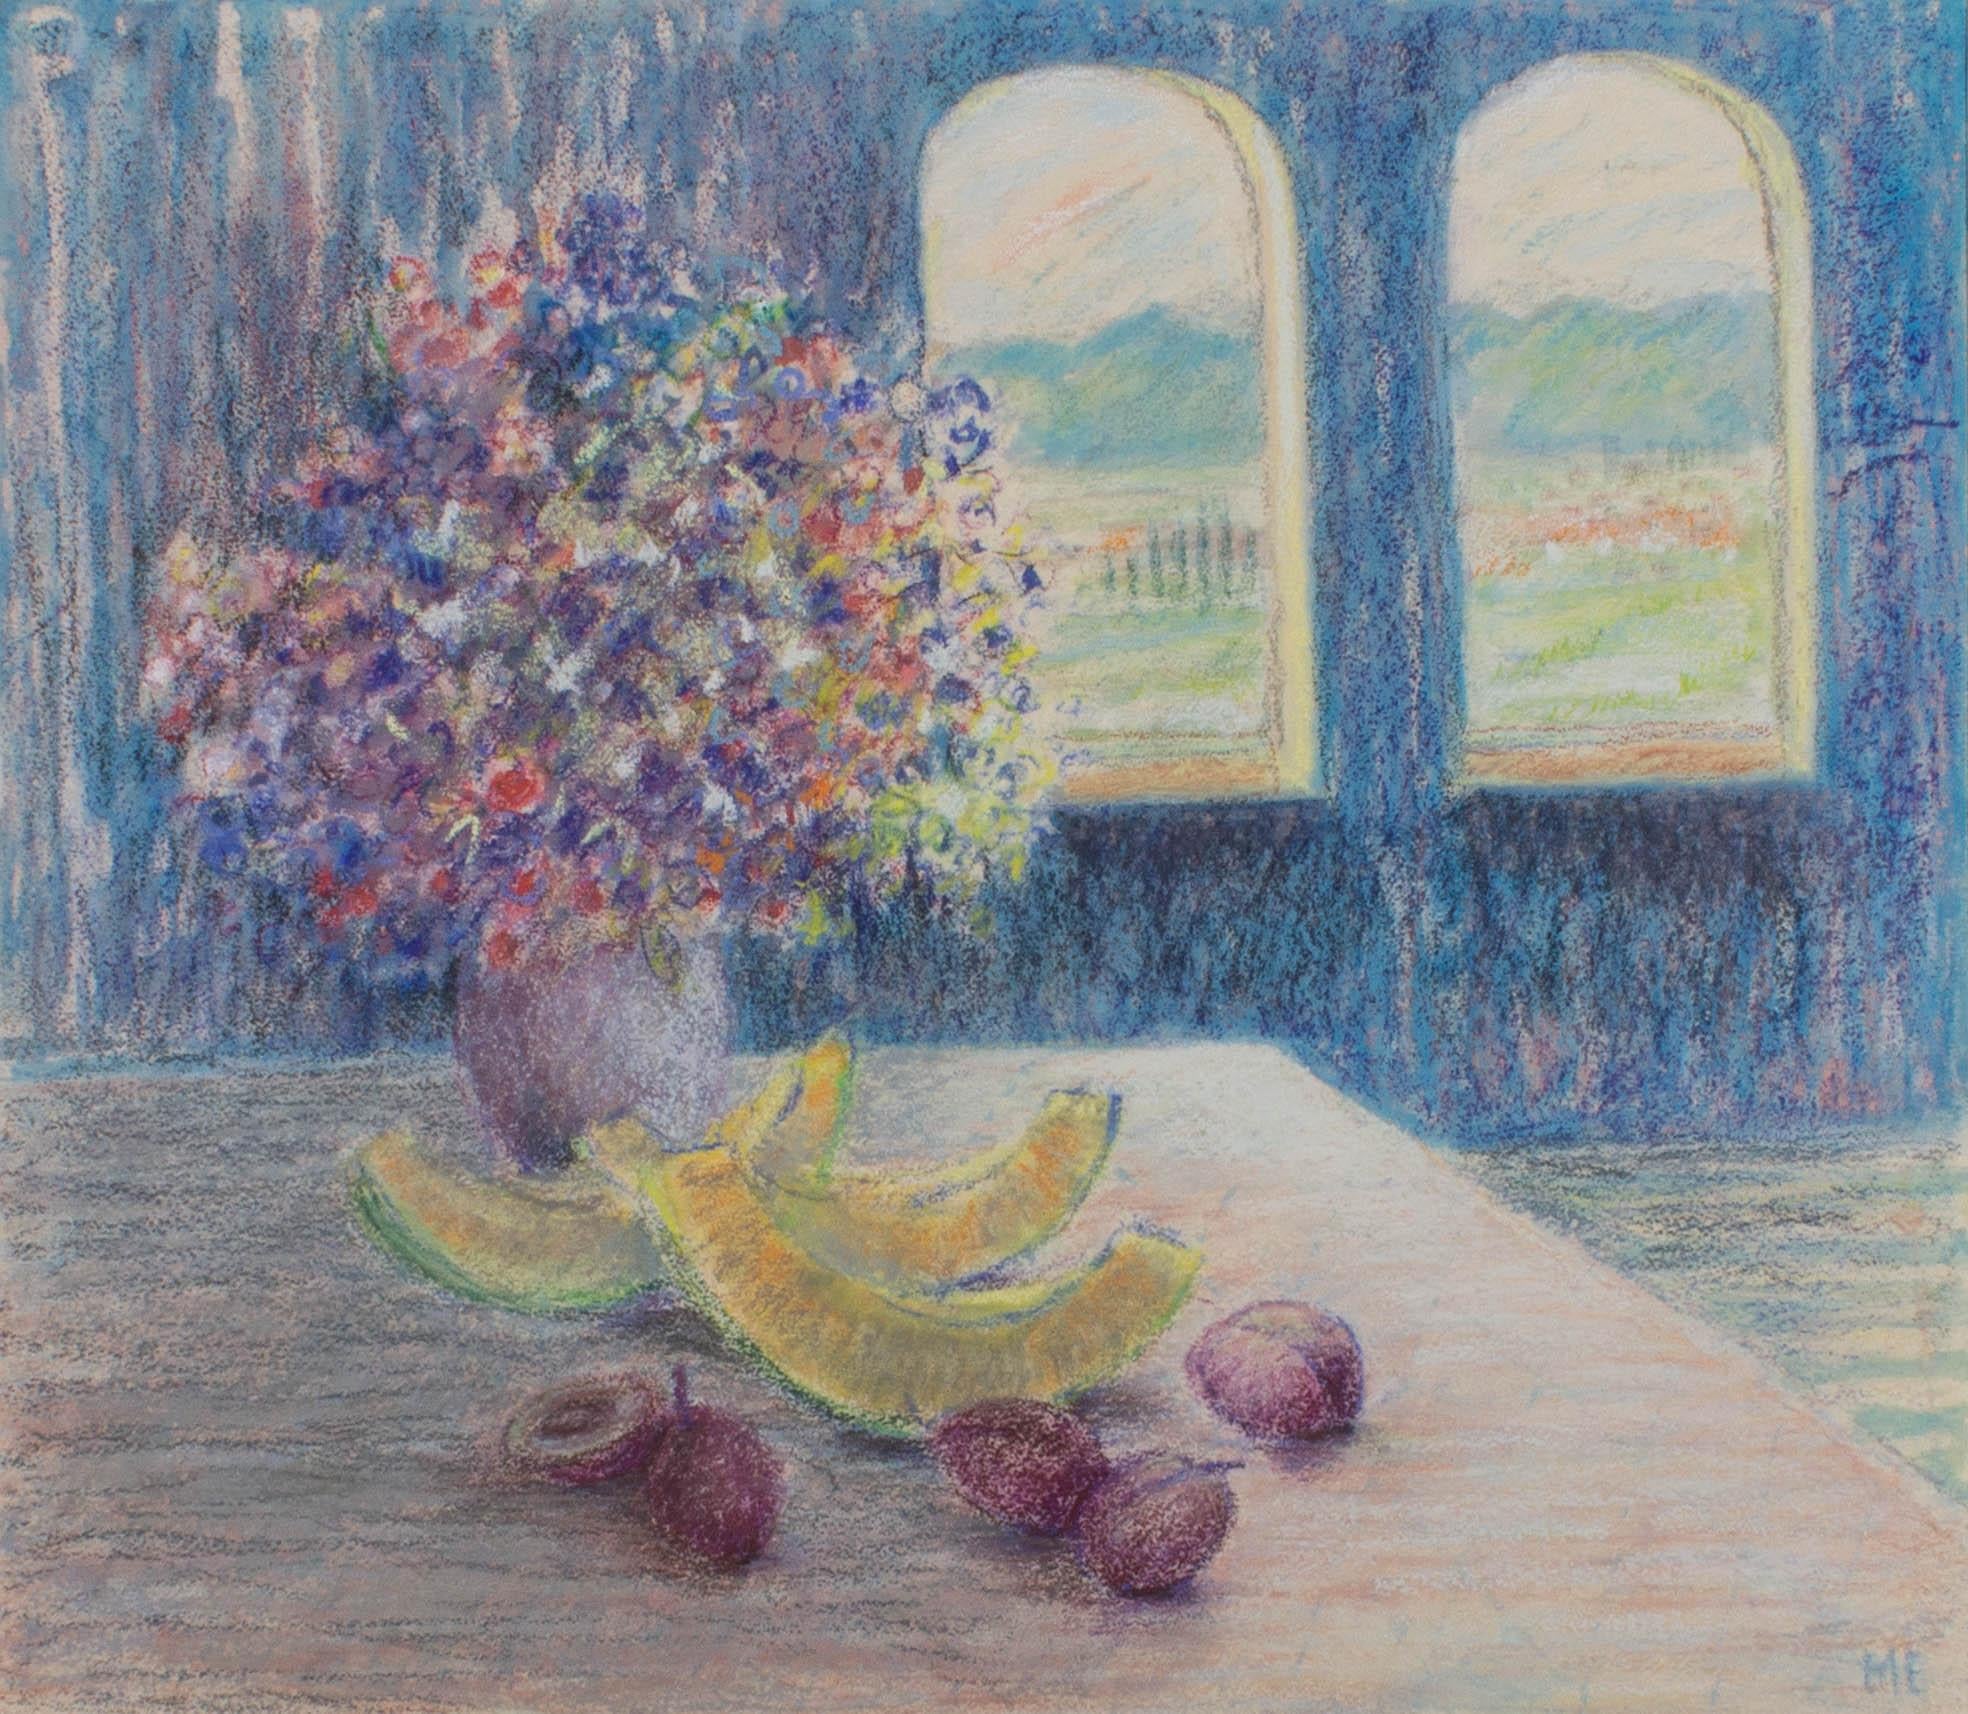 A soft and hzy interior scene with a botanical still life of flowers and fruit on a table. A view of a continental countryside can be seen through the arched windows. The artist has initialed to the lower right corner and the drawing has been